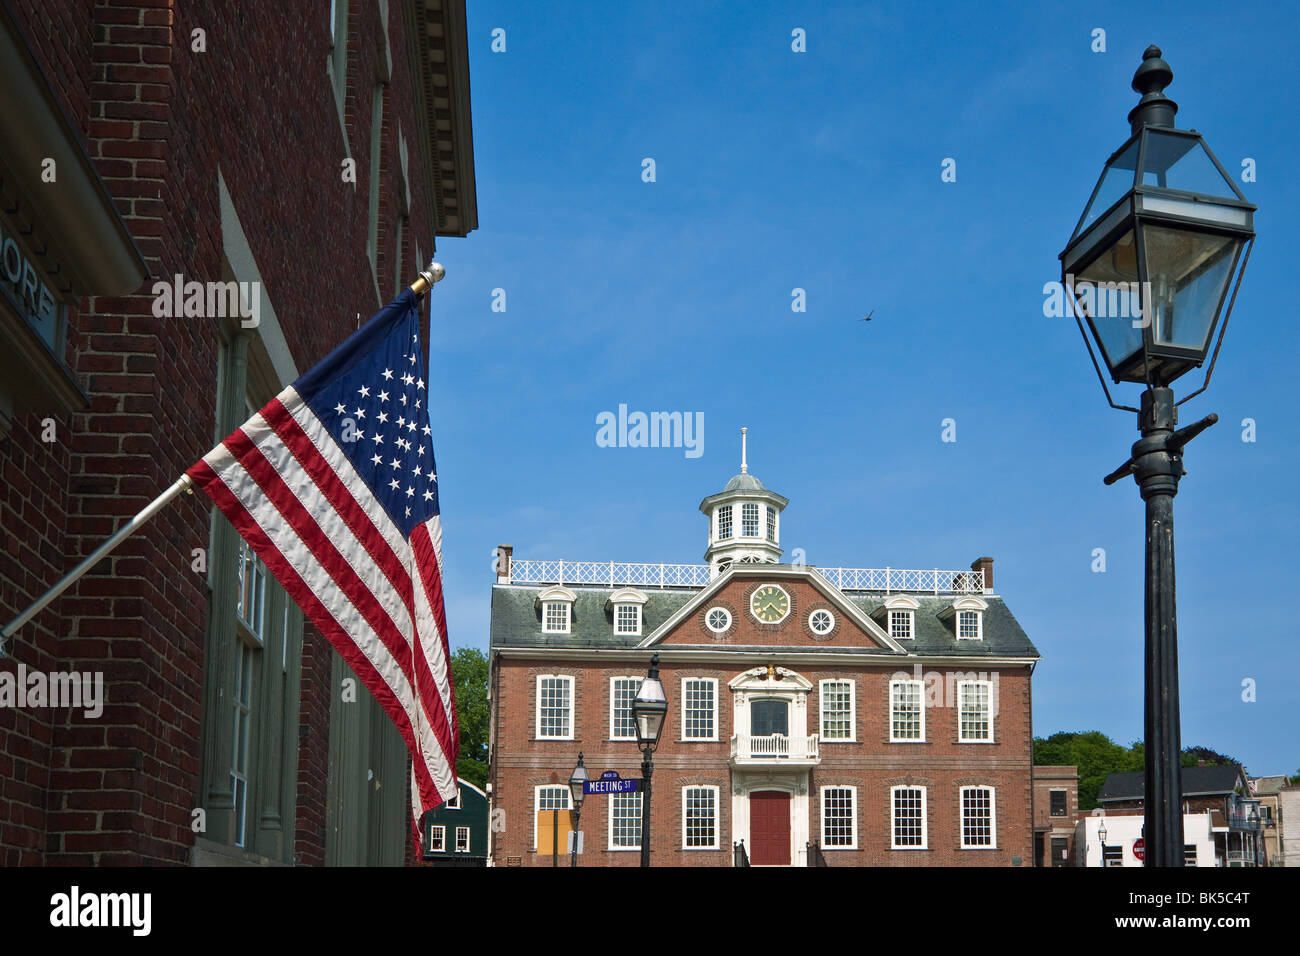 The Stars and Stripes and  Old Colony House used in the film Amistad, on Washington Square in Newport, Rhode Island, USA Stock Photo